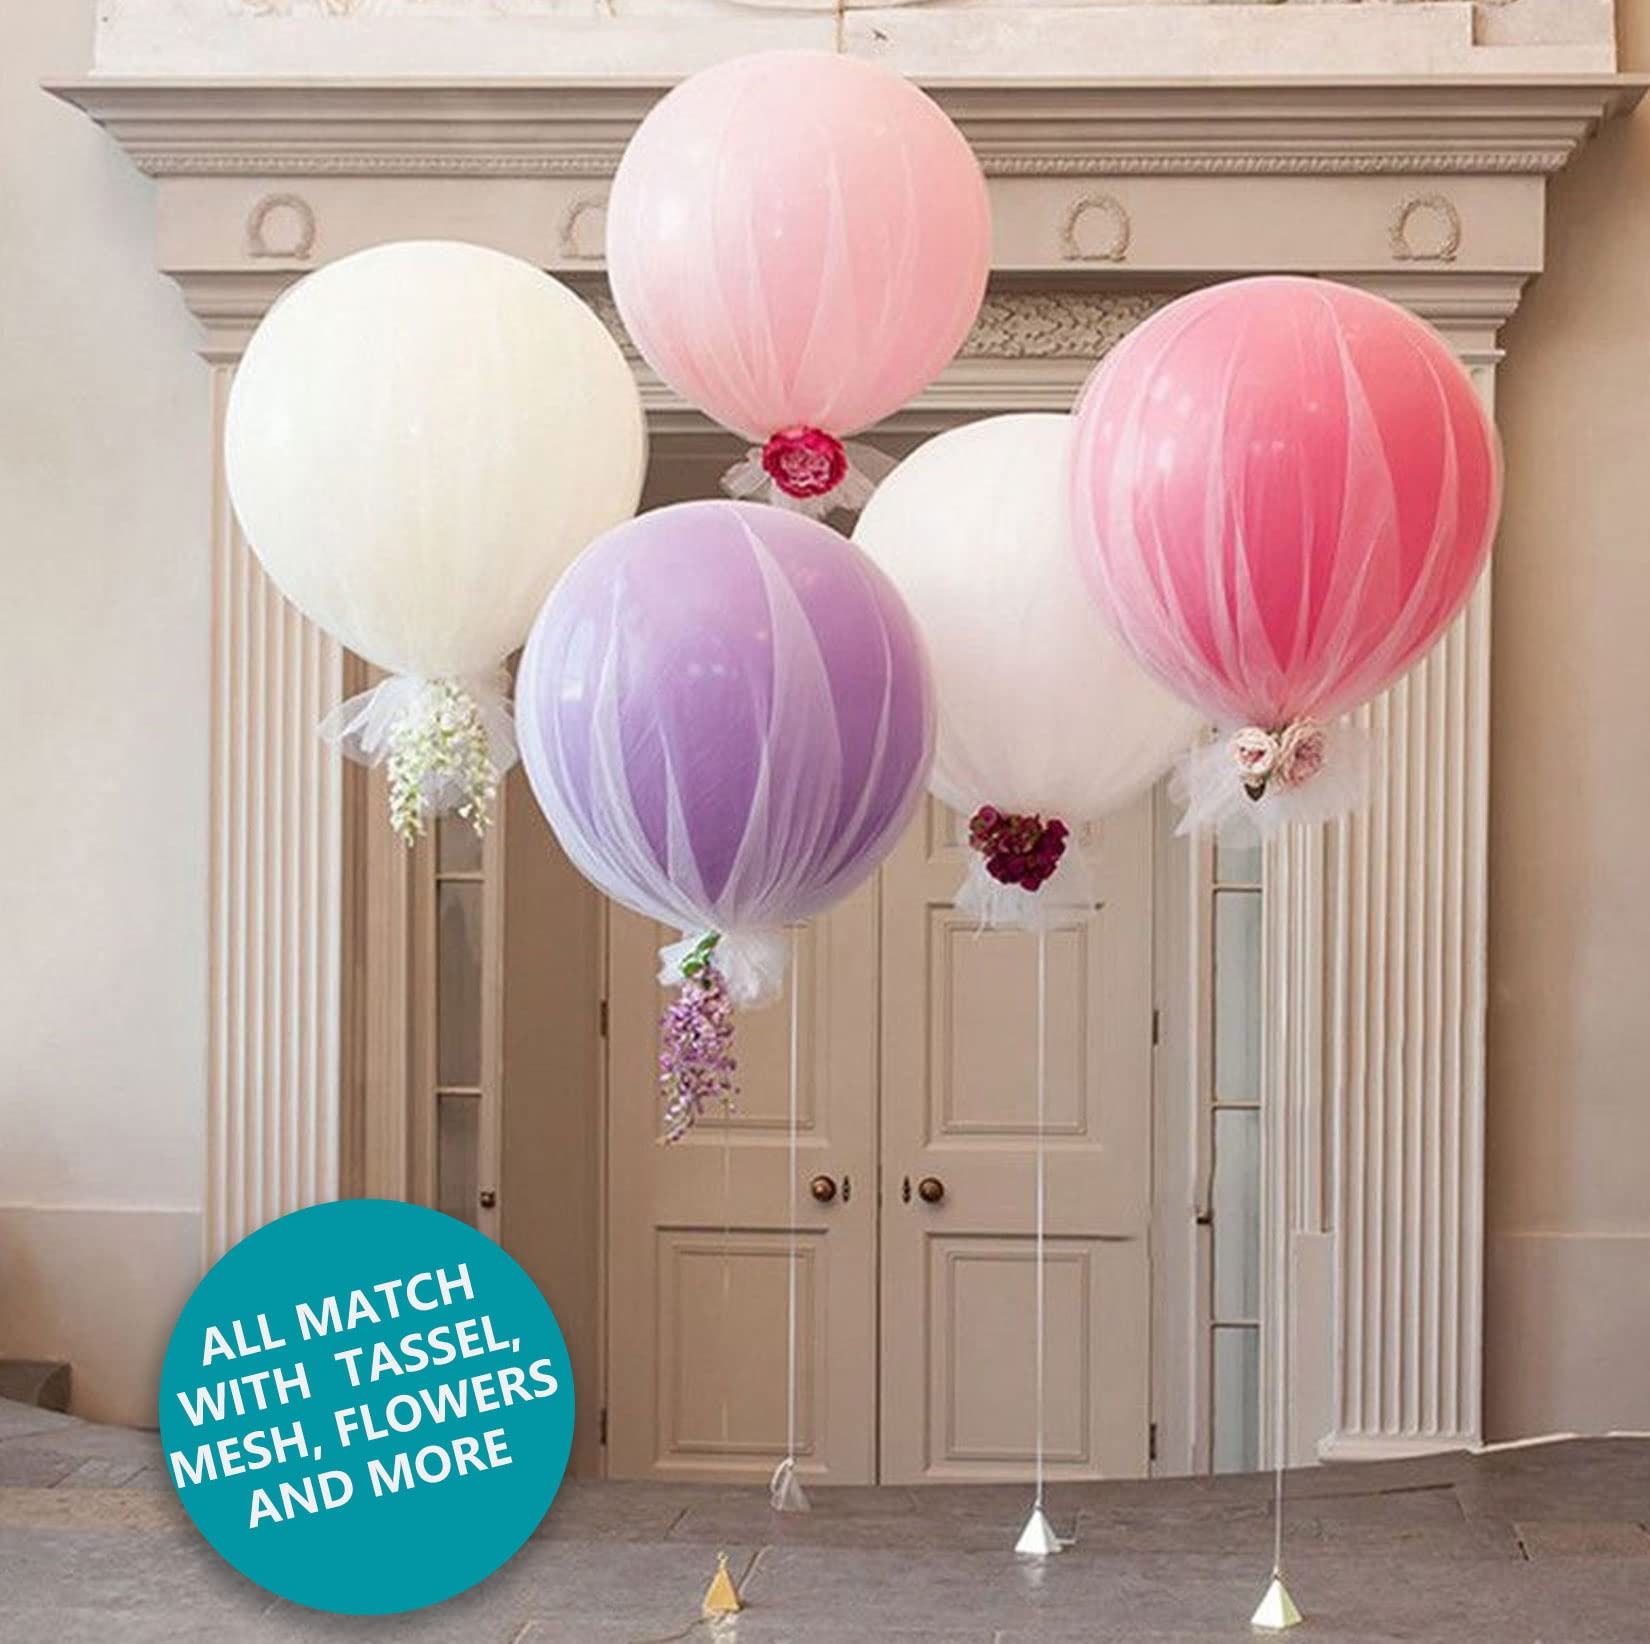 15pcs 24 Inch Balloons Large Assorted Balloons Thick Latex Heavy Duty Balloon Round Big Giant Globos Grandes Huge XXL Jumbo stuffing Colorful Ballons Wedding Birthday Rainbow Party Decorations